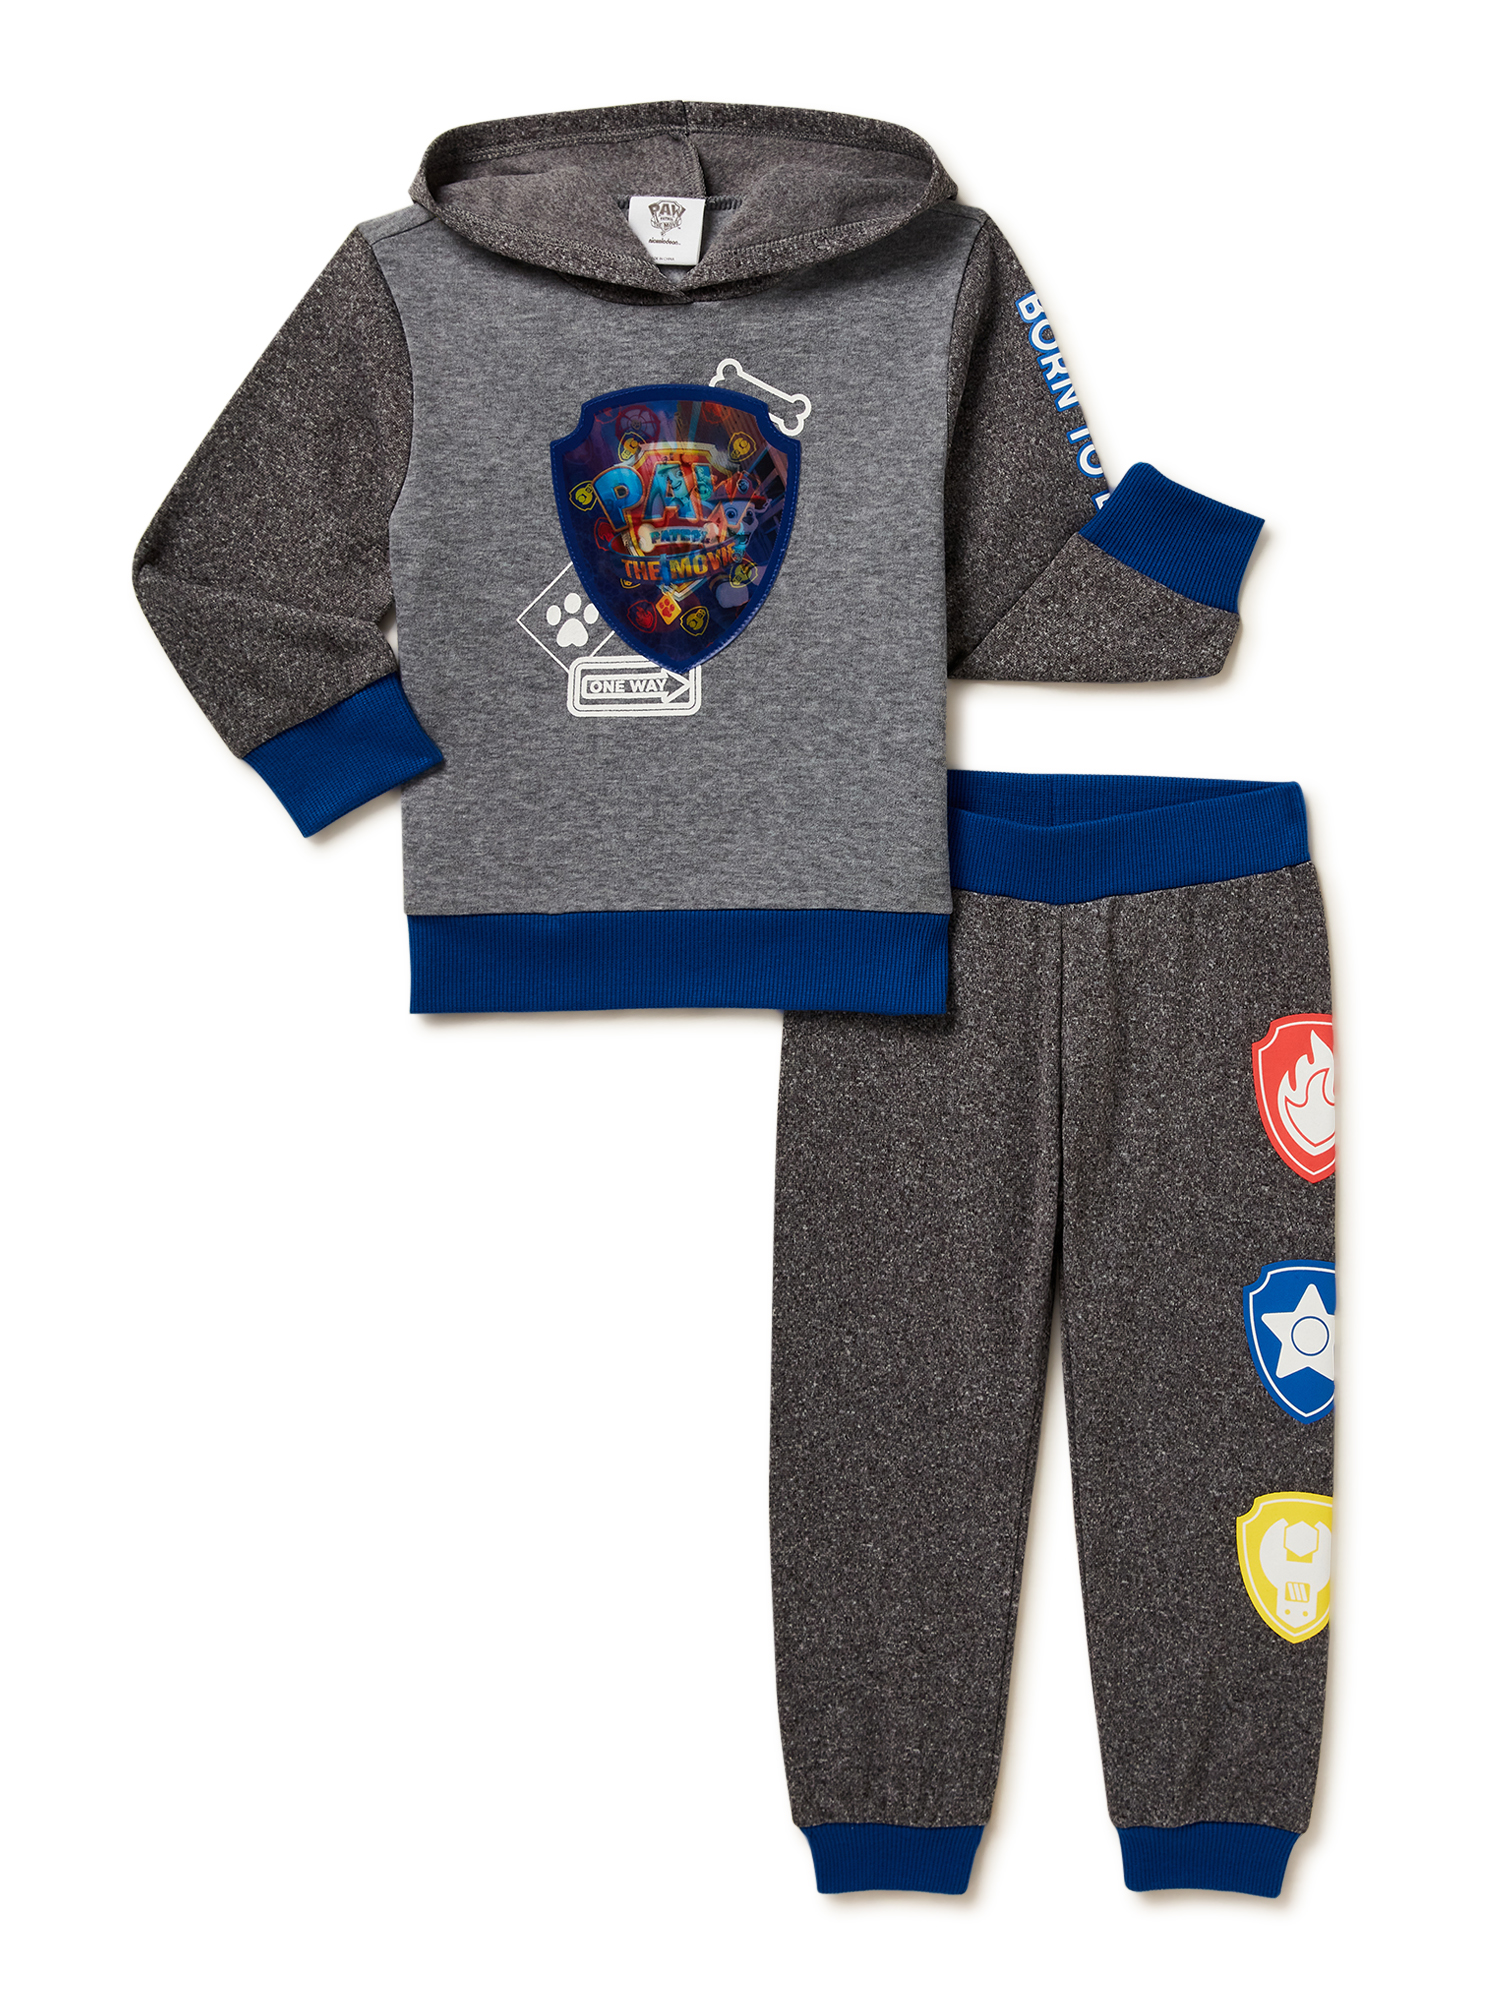 Paw Patrol Toddler Boys Lenticular Hoodie and Pants, 2-Piece Outfit Set, Sizes 2T-4T - image 1 of 5